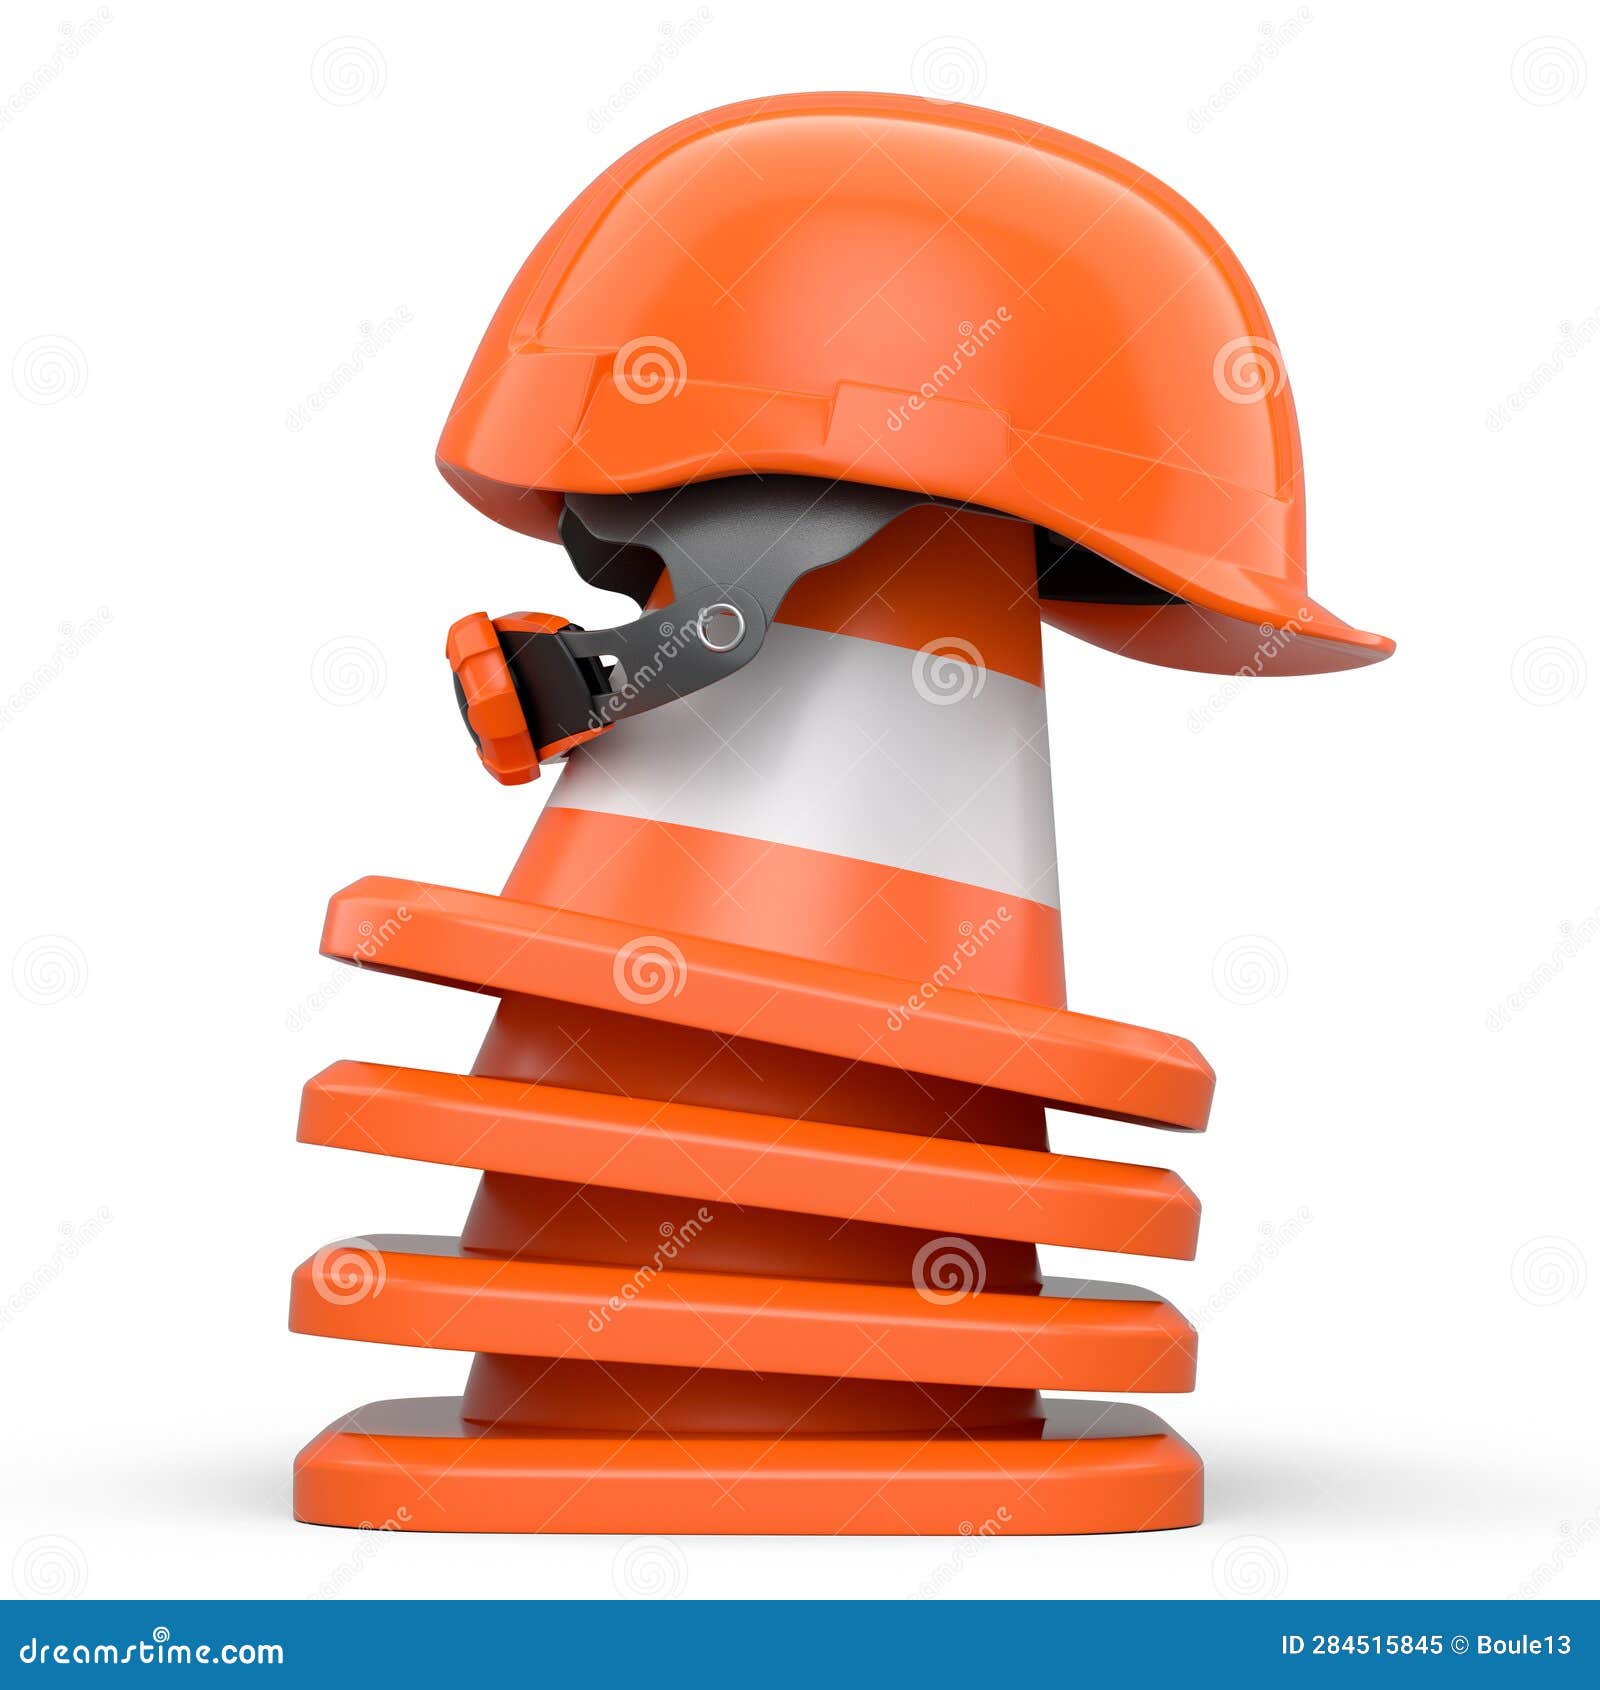 Stack of Safety Helmets or Hard Hats and Traffic Cones on White Background  Stock Illustration - Illustration of workwear, protection: 284515845